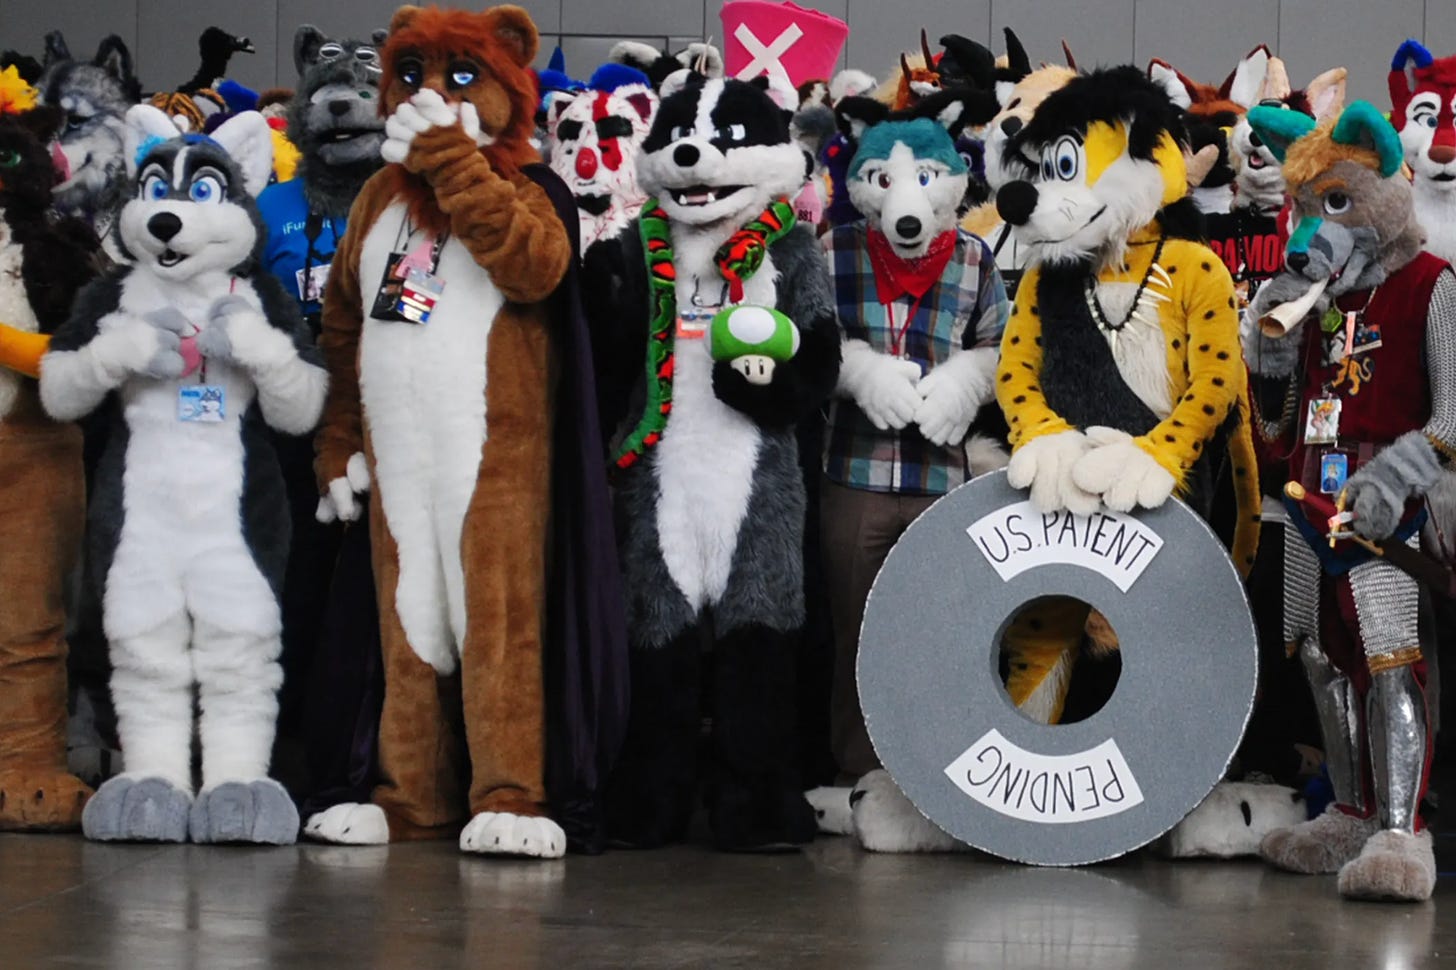 Furries in costume in the US